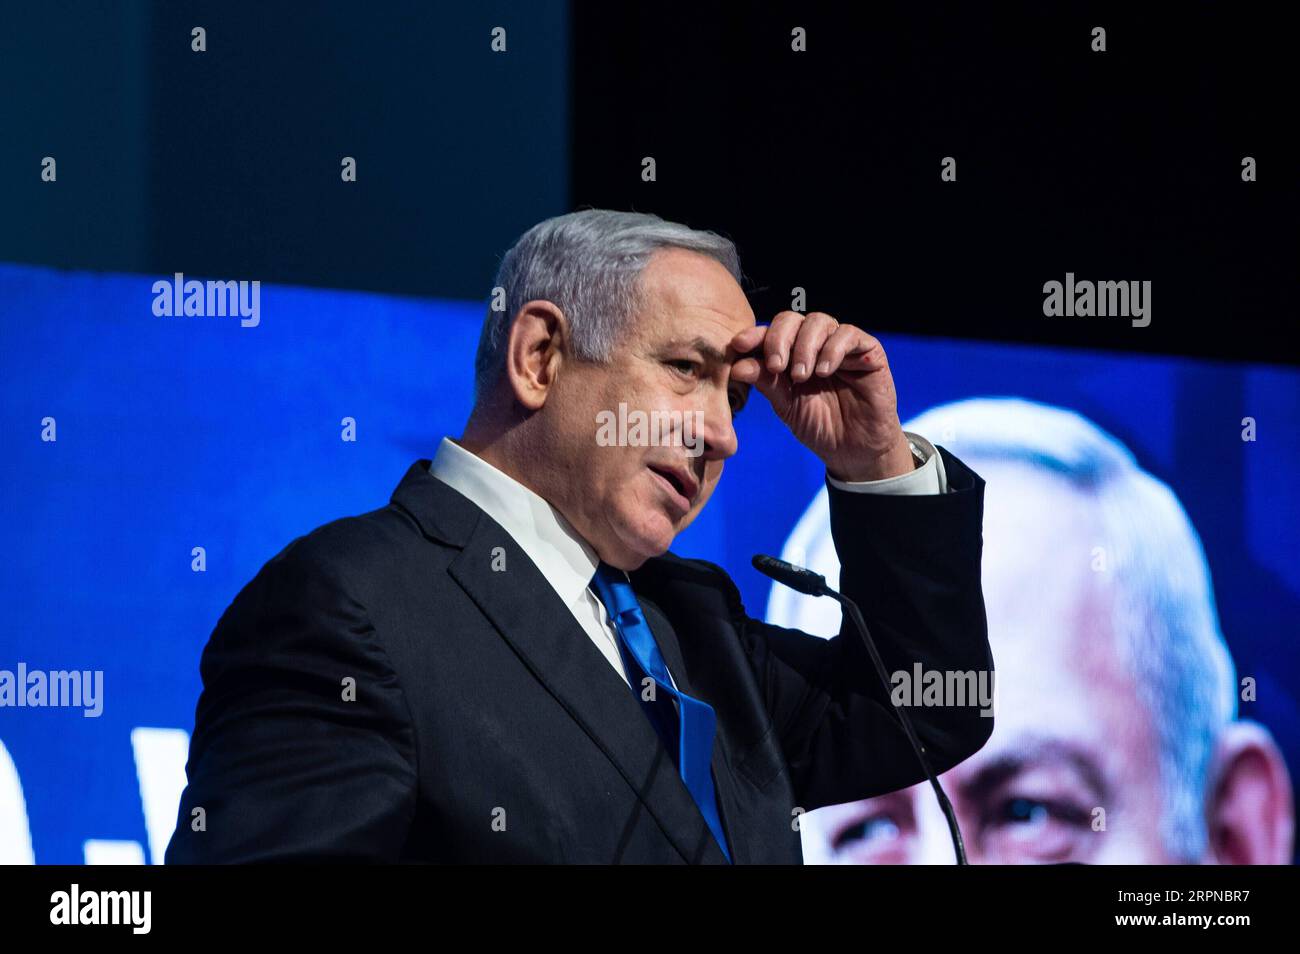 200226 -- MIGDAL HAEMEK, Feb. 26, 2020 Xinhua -- Israeli Prime Minister Benjamin Netanyahu takes part in a Likud Party election rally in northern Israeli city of Migdal Haemek on Feb. 25, 2020. As Israel is heading to an unprecedented third election within a year on March 2, polls indicate that a fourth election in a few months seems increasingly realistic. The two main opponents are Prime Minister Benjamin Netanyahu, leader of the right-wing Likud party, and Benny Gantz, leader of the centrist Blue and White party. Gil Eliyahu/JINI/Handout via Xinhua MIDEAST-MIGDAL HAEMEK-NETANYAHU-ELECTION R Stock Photo